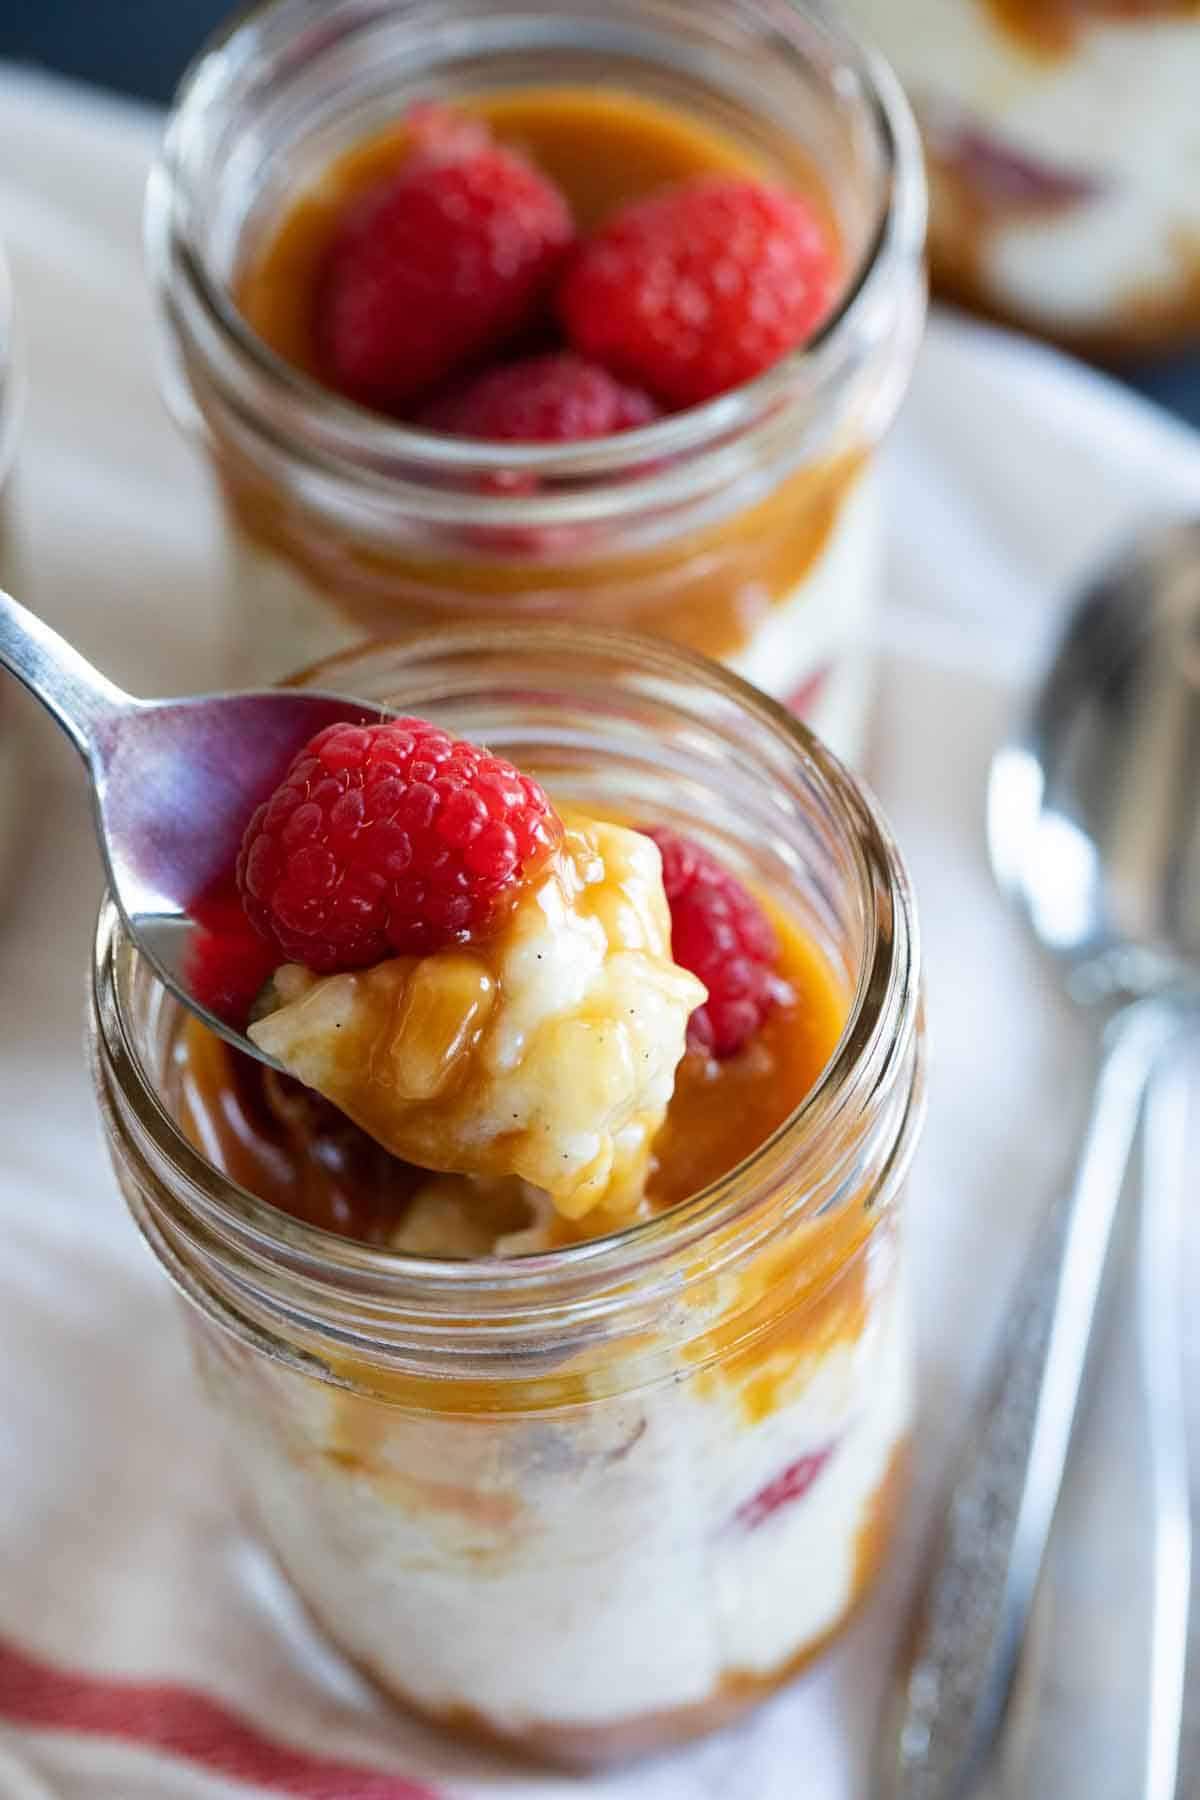 spoonful of rice pudding with caramel and raspberries showing texture.